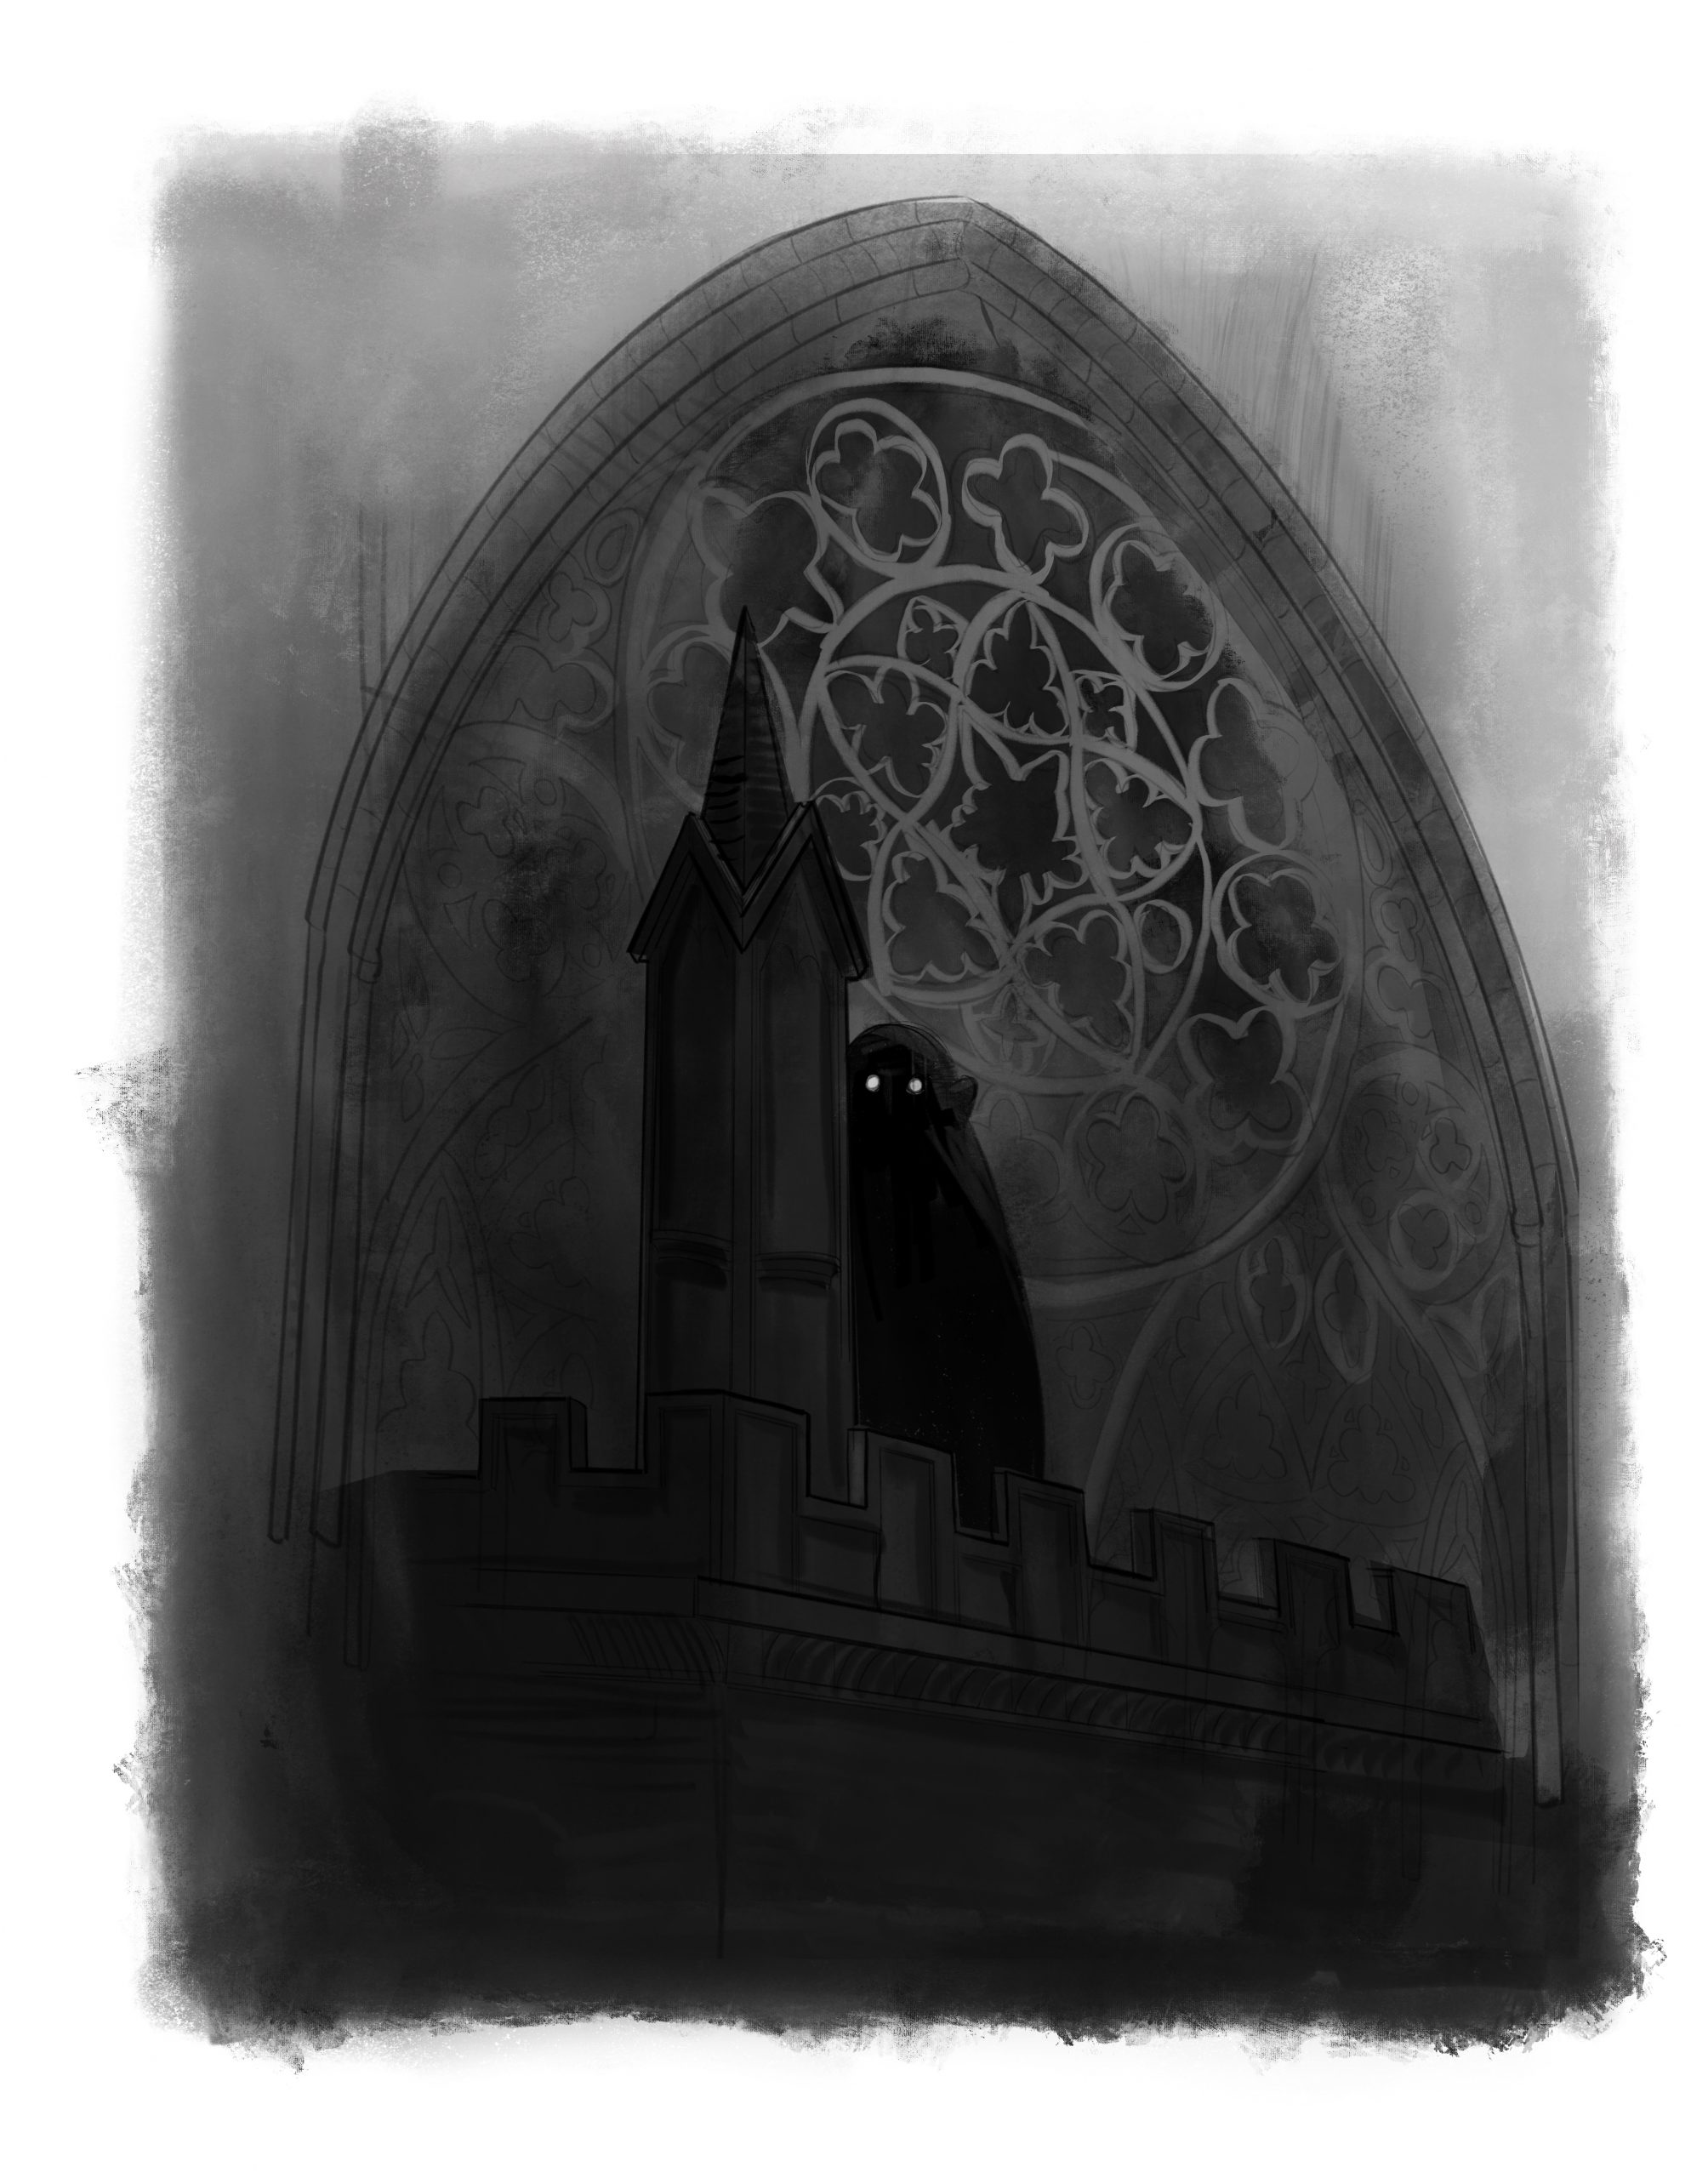 Black and white illustration of an ornate window on Exeter Cathedral. Barely visible is a figure in the darkness, their round eyes reflecting the moonlight.